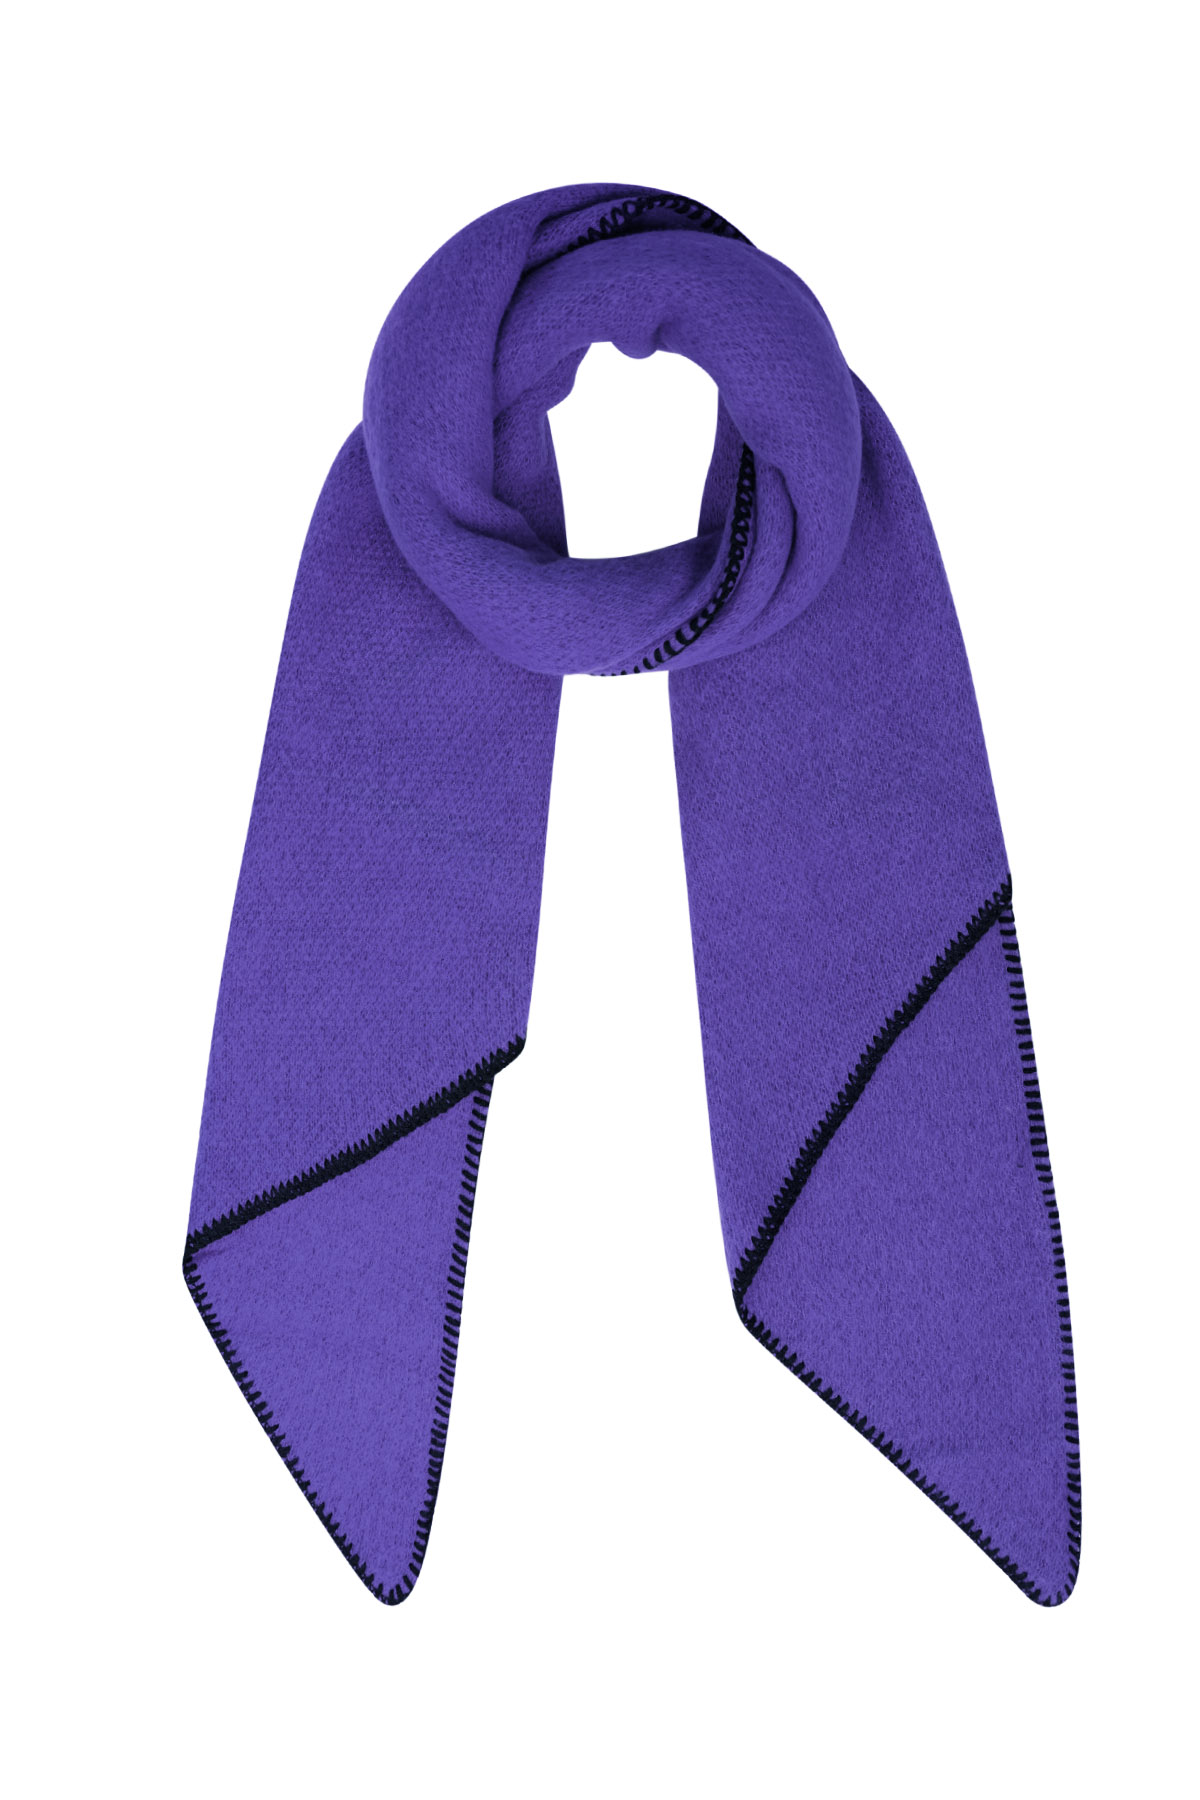 Single-colored winter scarf with black stitching - purple h5 